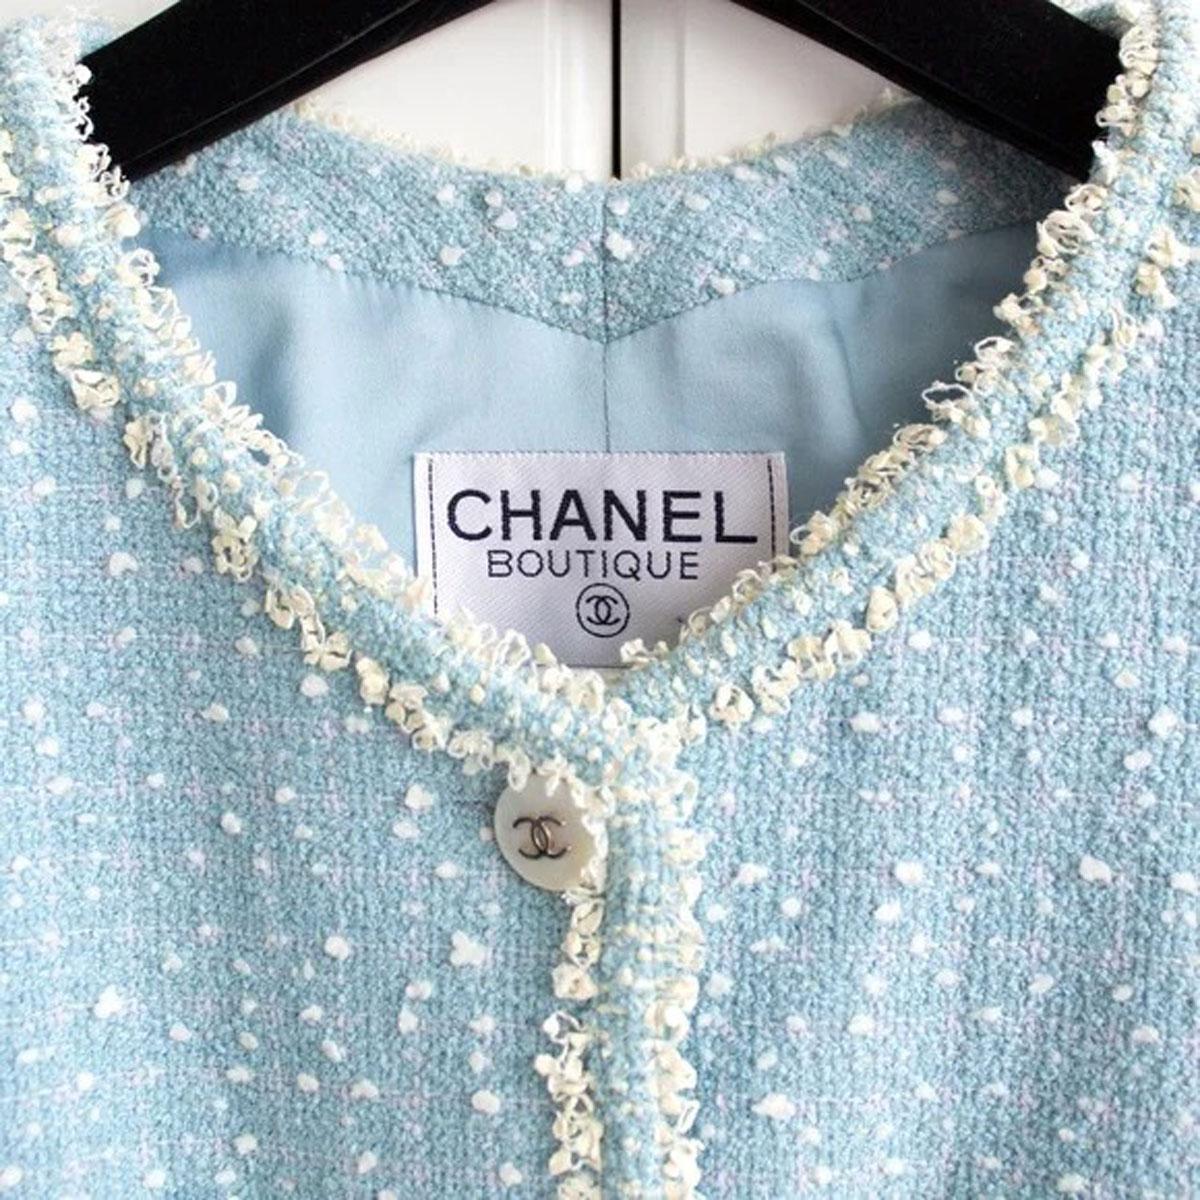 Chanel 1997 Vintage Baby Blue Tweed Jacket Museum Piece Seen on Princess Diana  For Sale 6